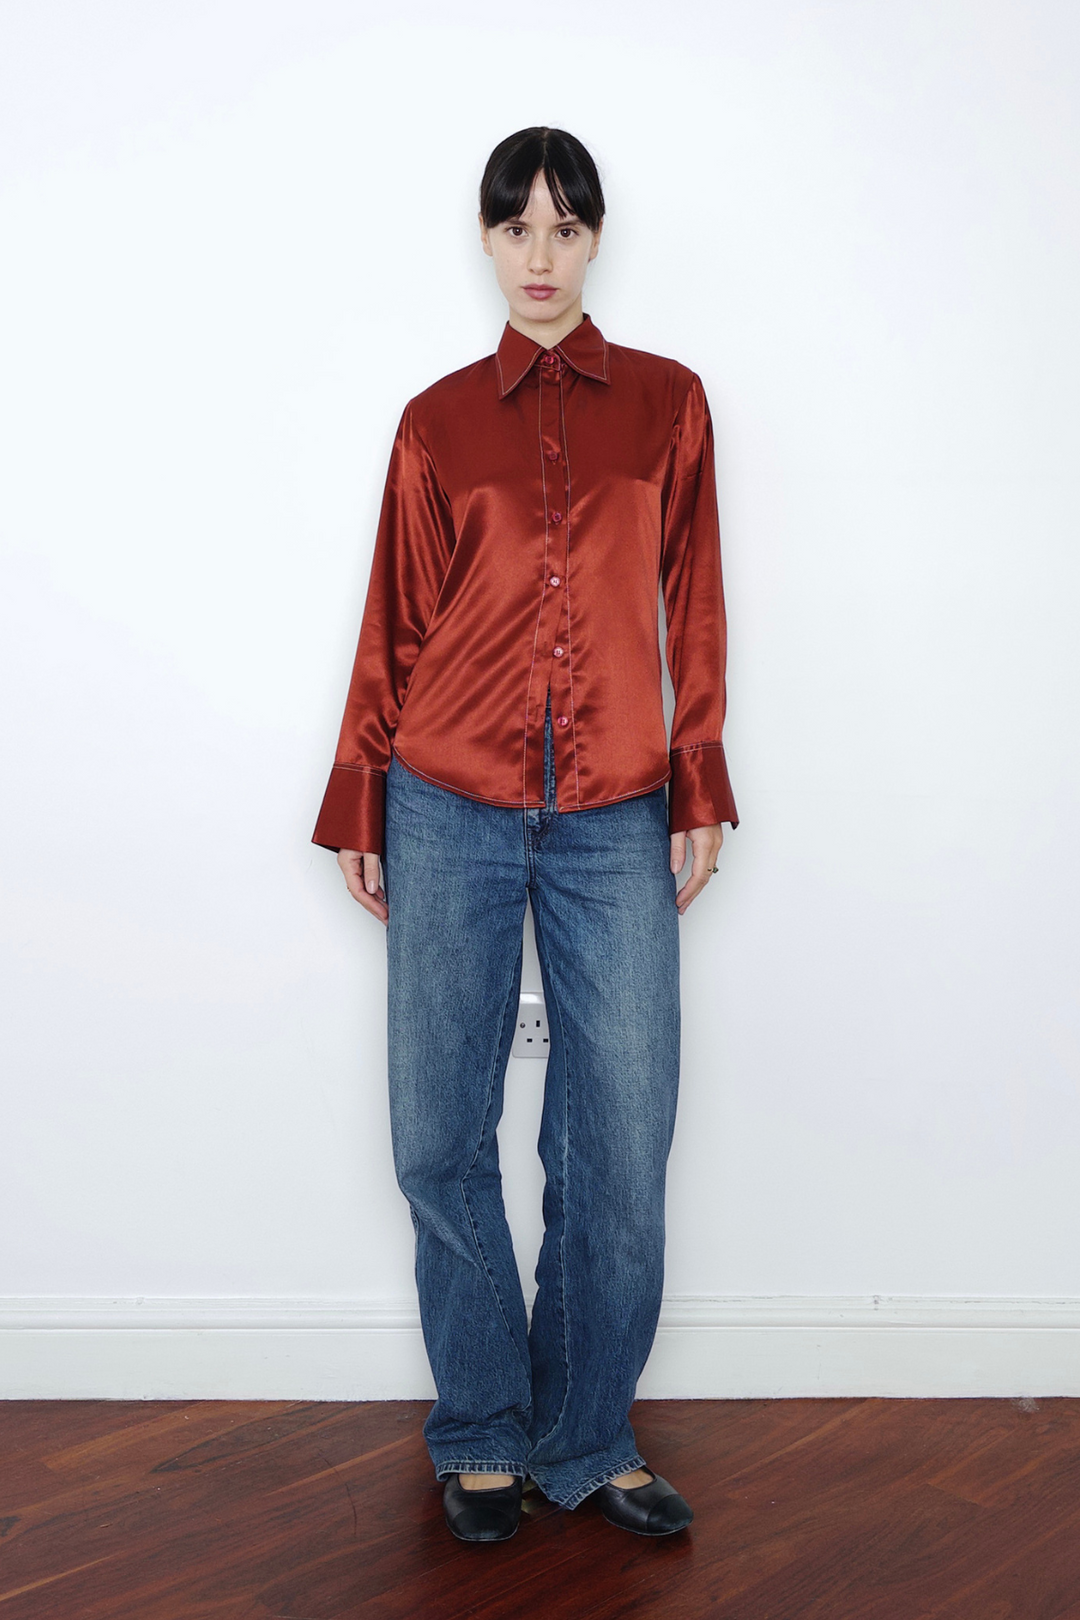 rust silk shirt with contrast stitching with a statement collar and cuffs